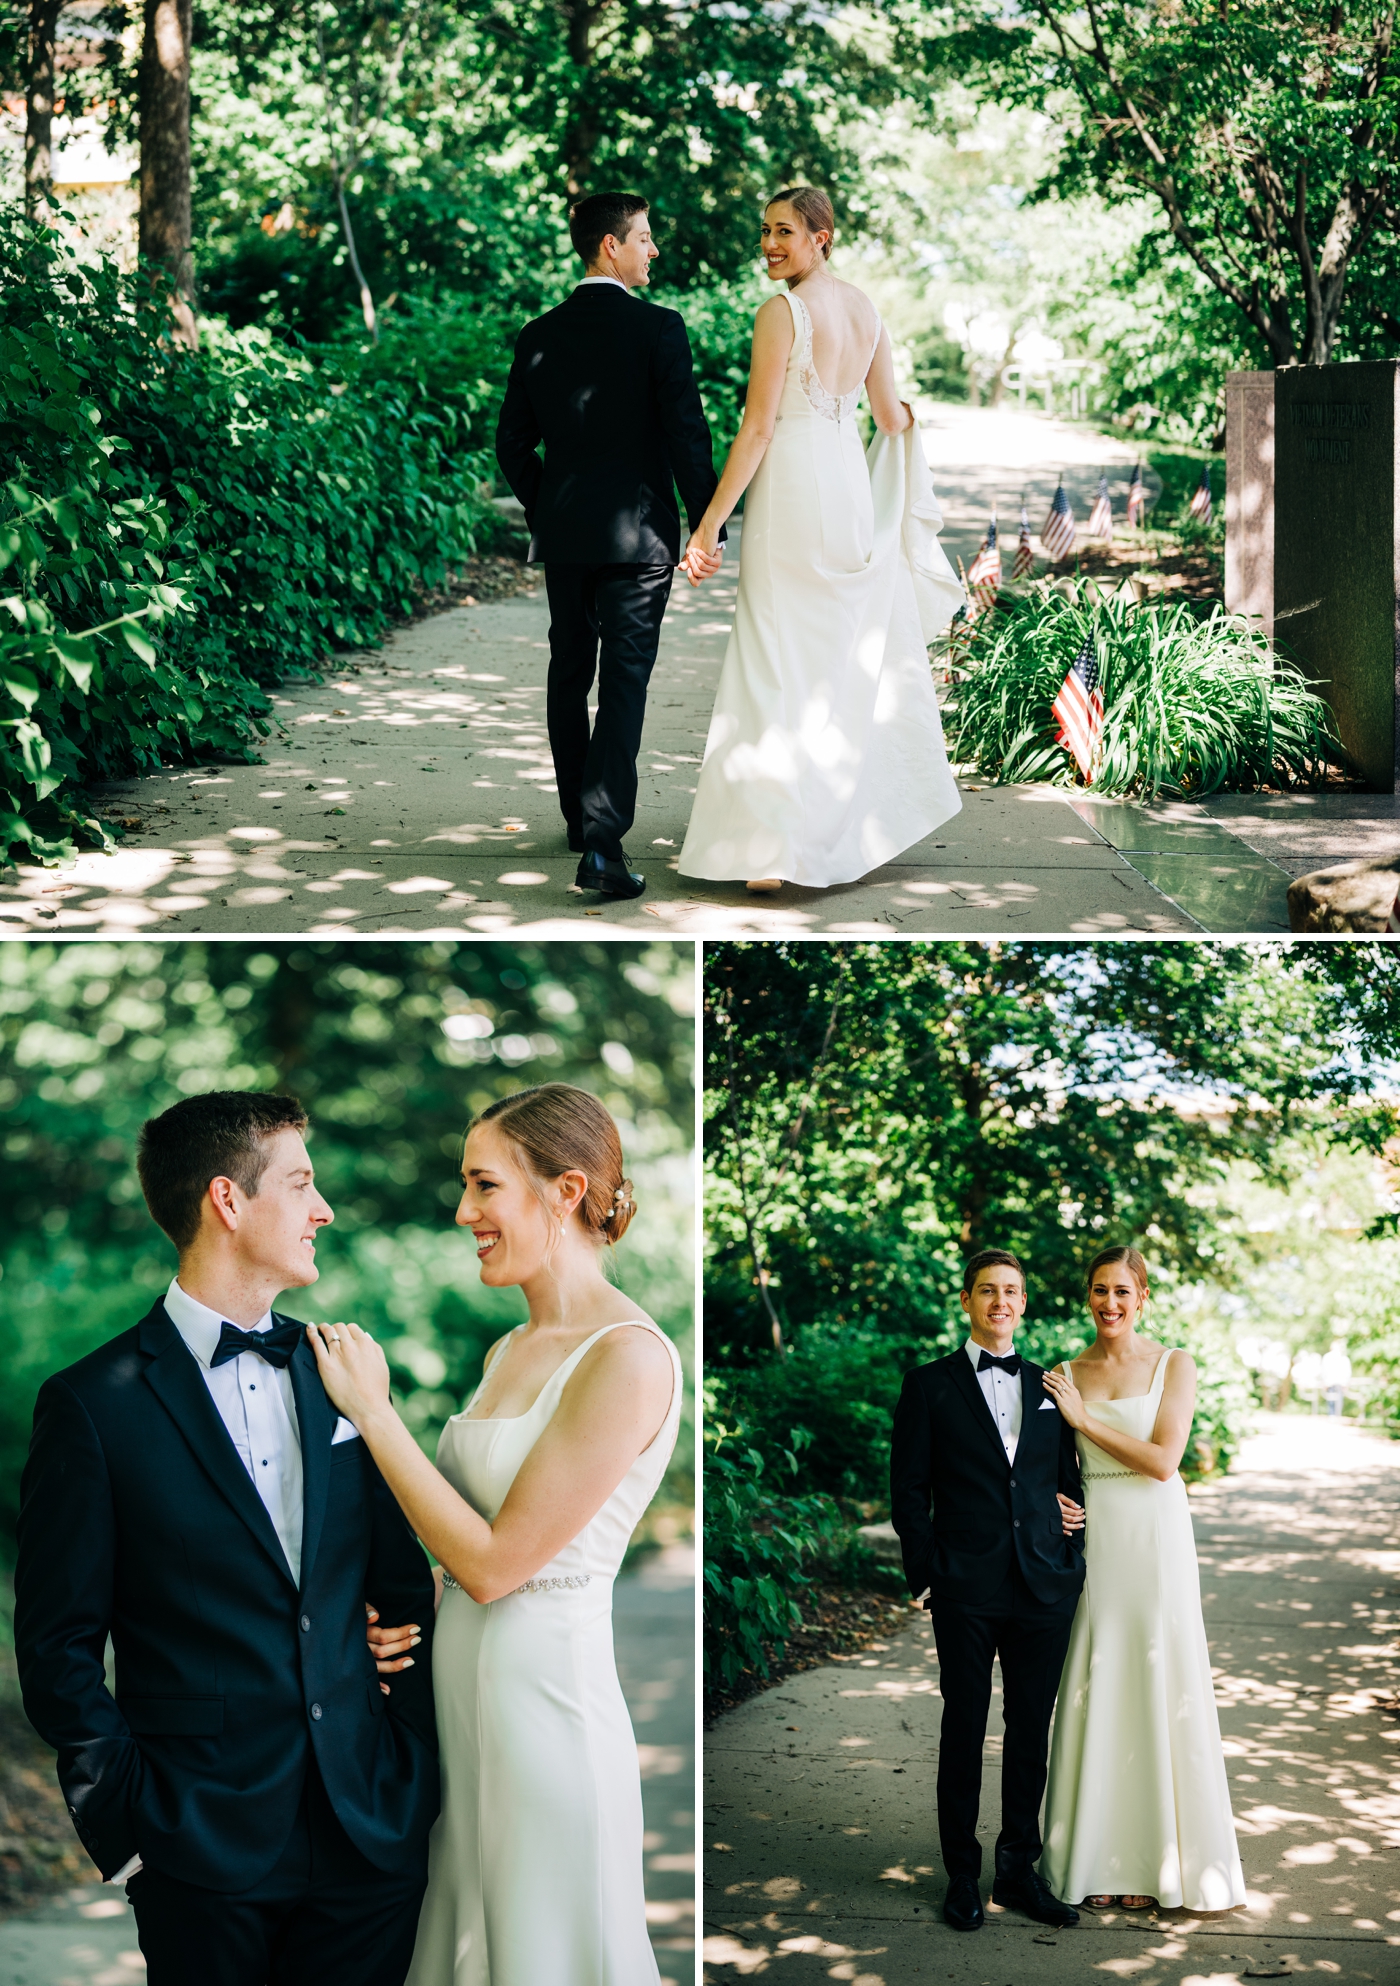 Bride & Groom Portraits at the North Shore of Pittsburgh by the Alleghany River